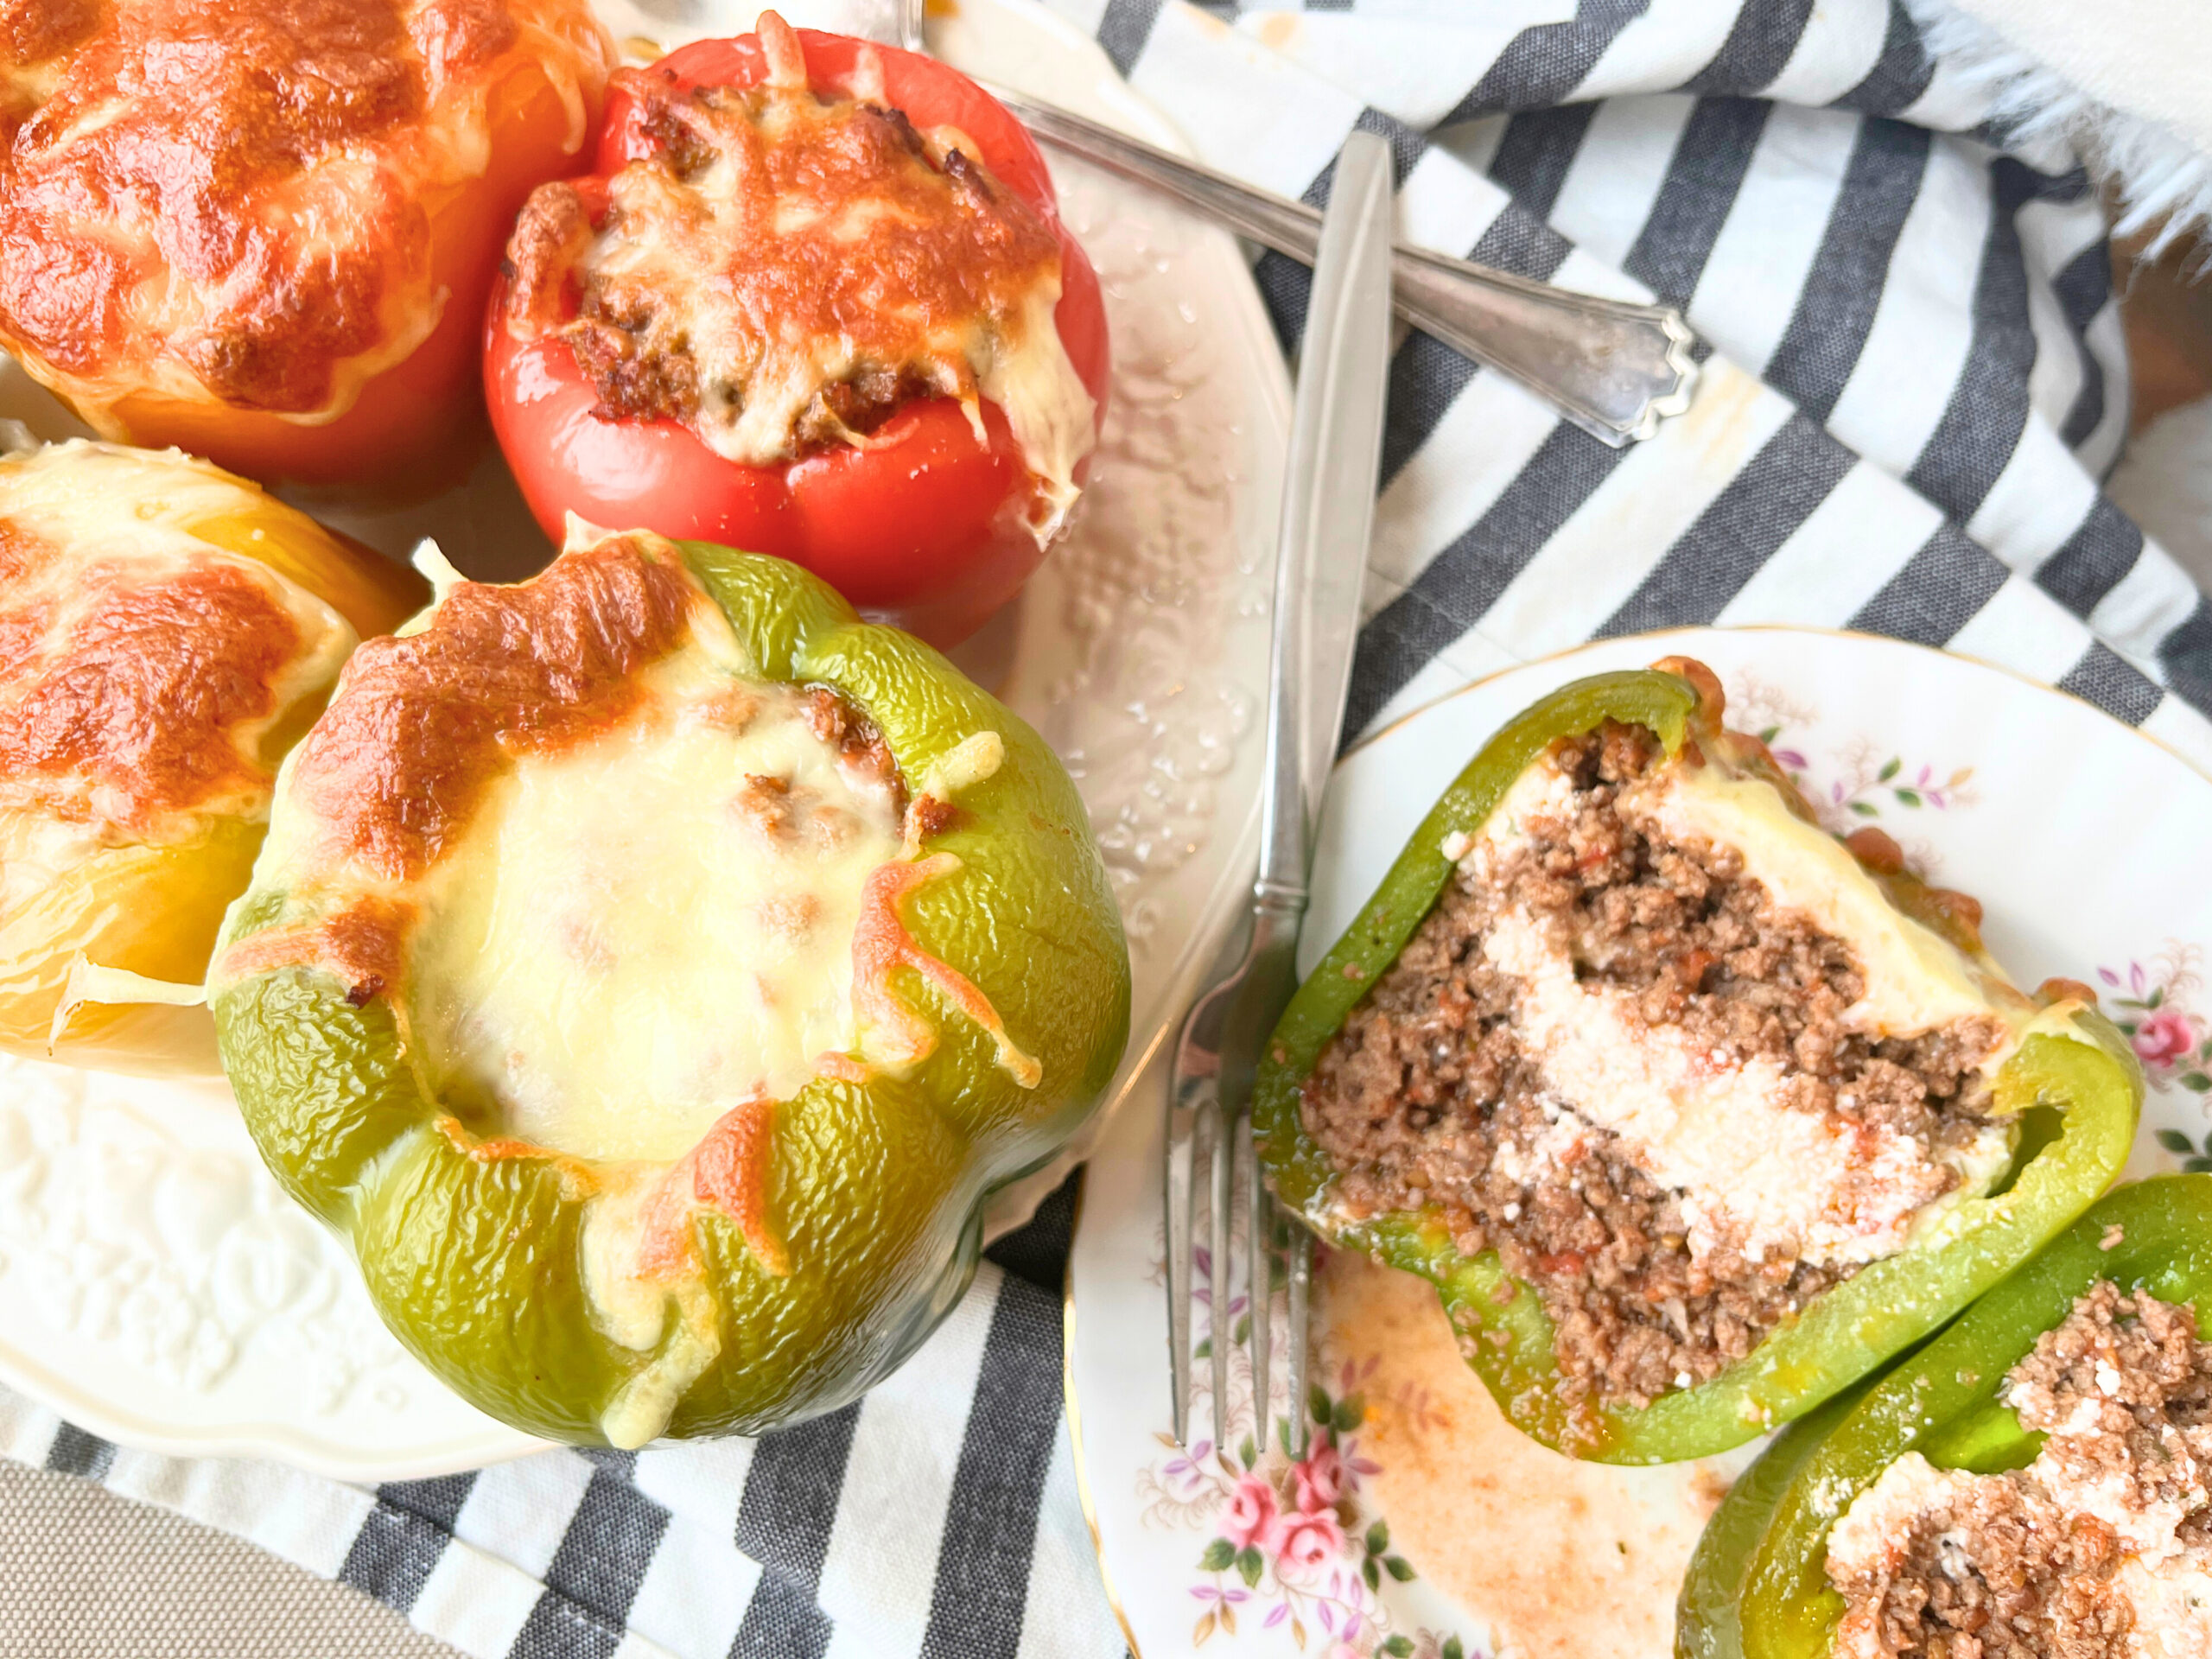 A plate of stuffed peppers there is a separate plate with one stuffed pepper cut in half. It is full of ground beef and cheese.